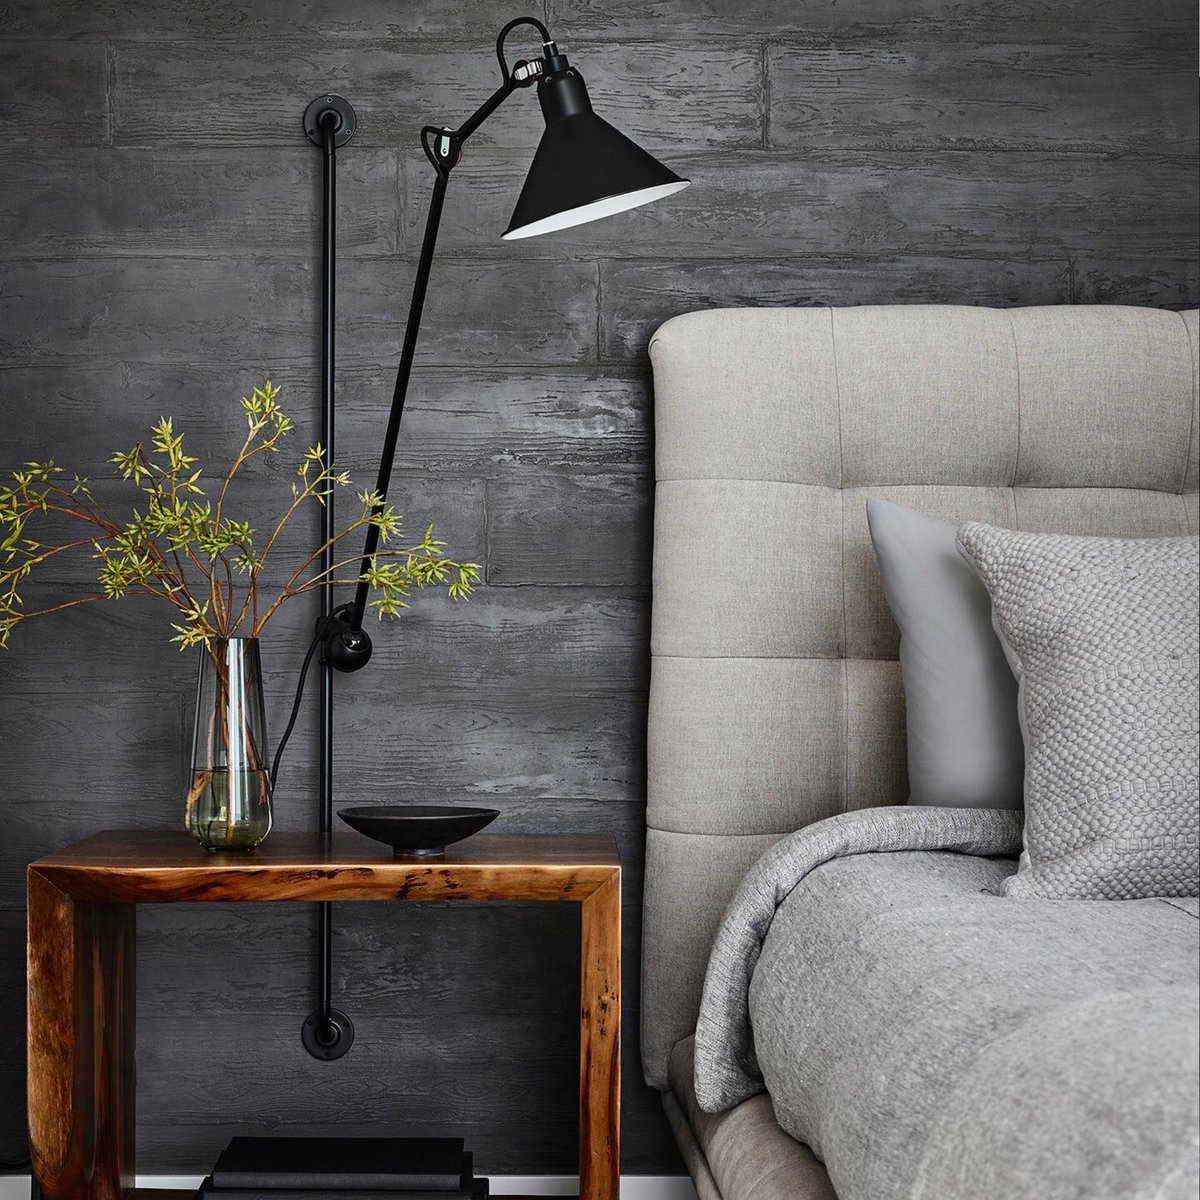 How do you feel about #black on black decor? We love it! It creates a #bold statement, the #shade goes with everything, it's #sleek and #modern, and adds a luxurious to the space! #BlackDecor #Monochromatic